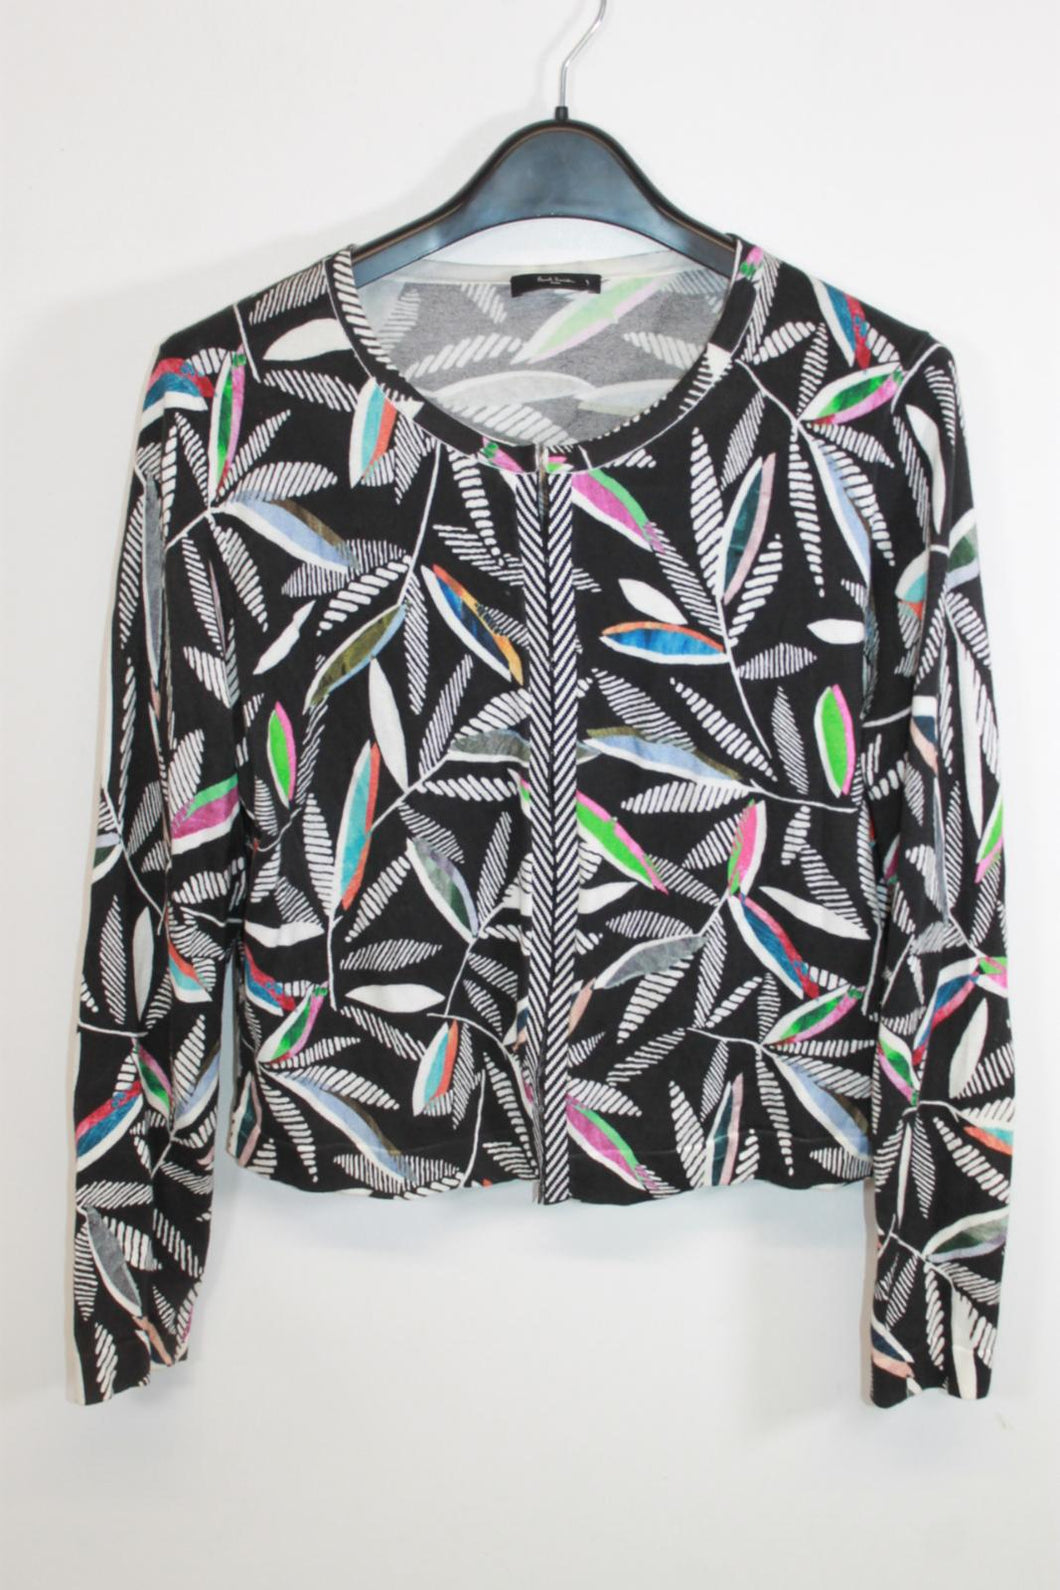 PAUL SMITH Ladies Multicoloured Cotton Round Neck Knitted Cardigan Size M